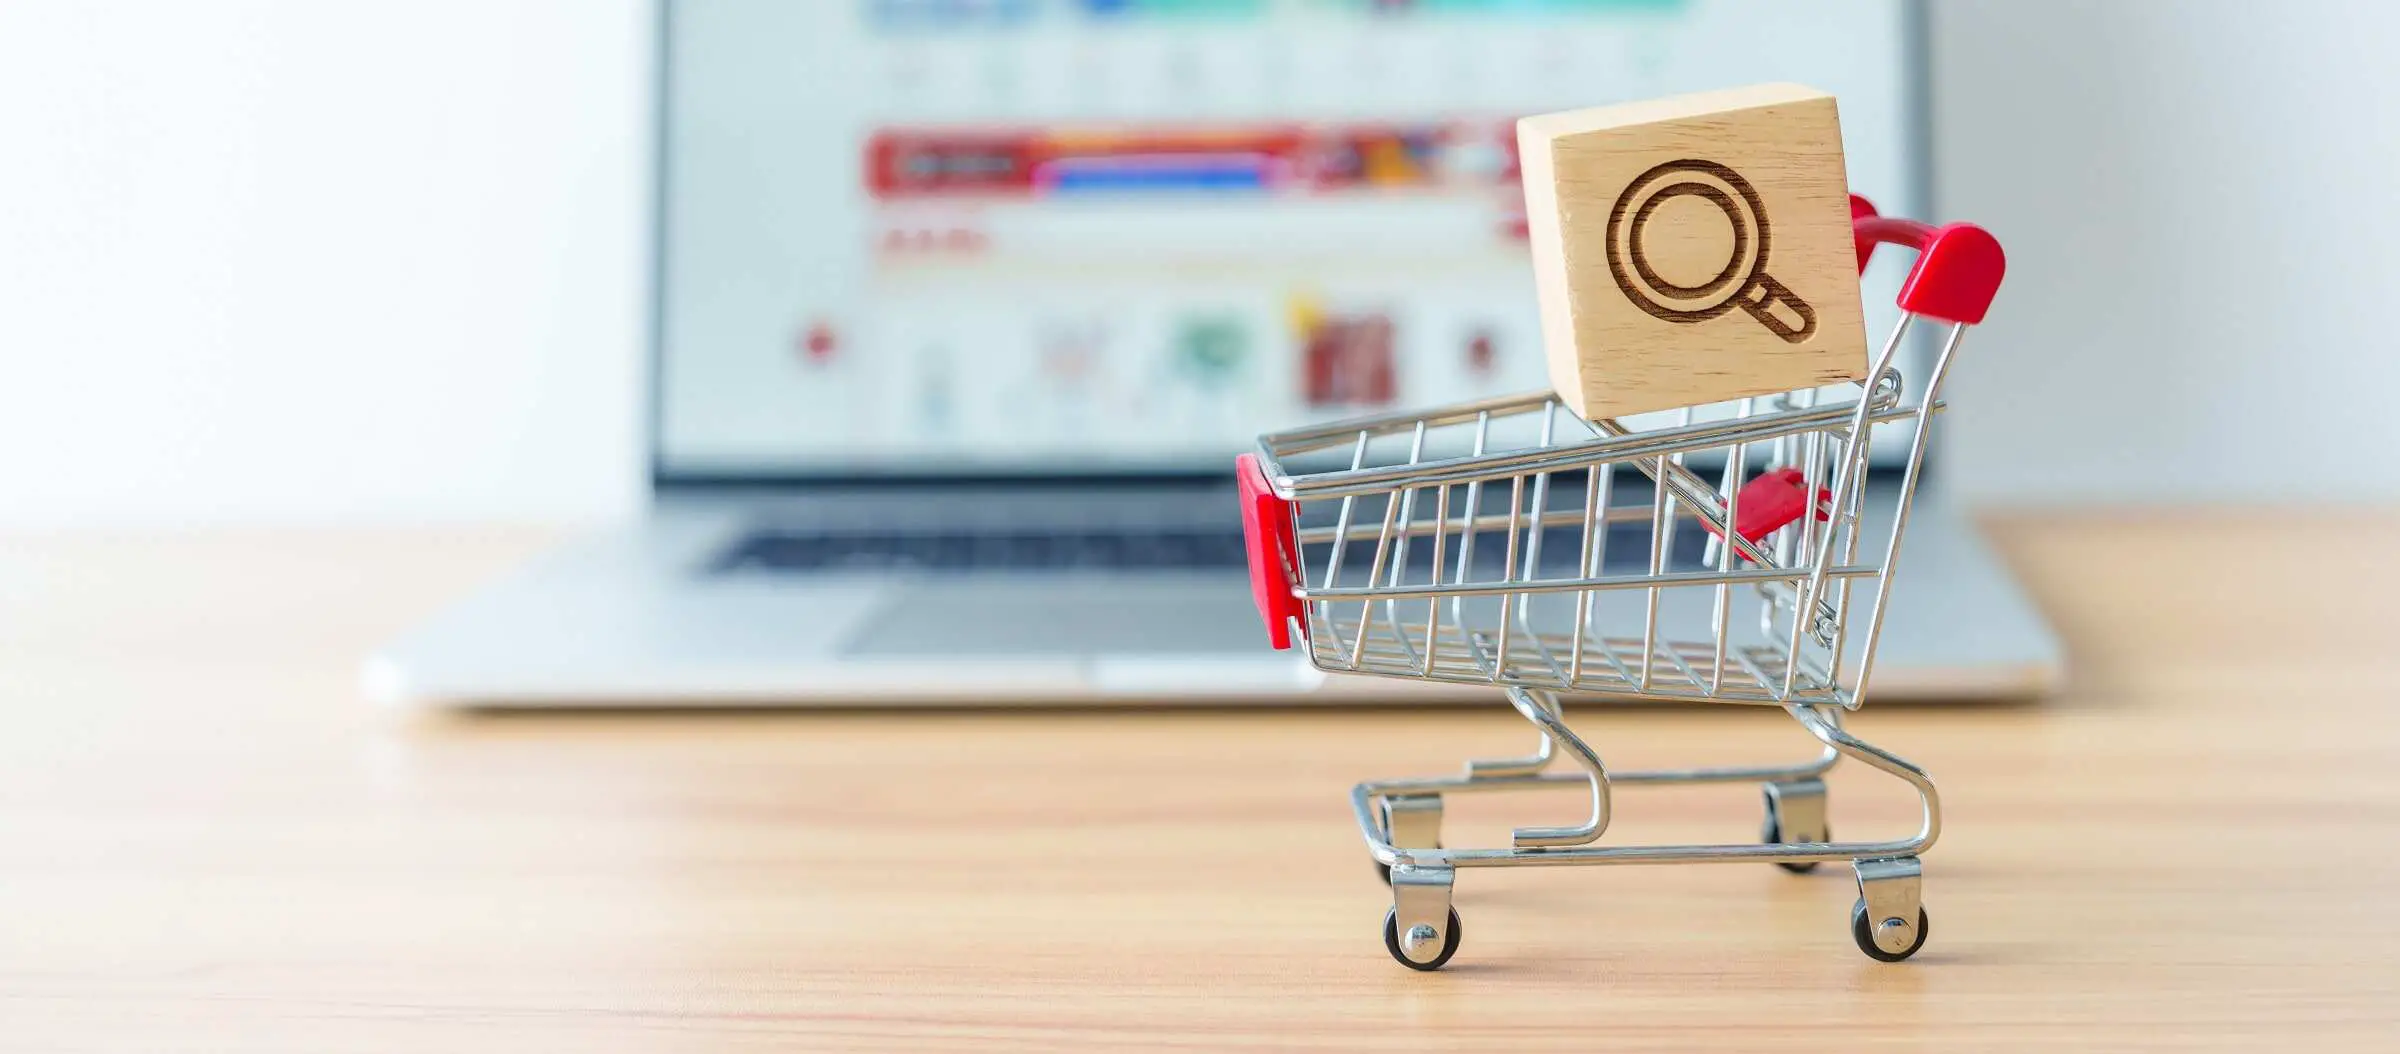 Why Are CPG Companies Turning to Segmentation and Analytics for Consumer Group Targeting